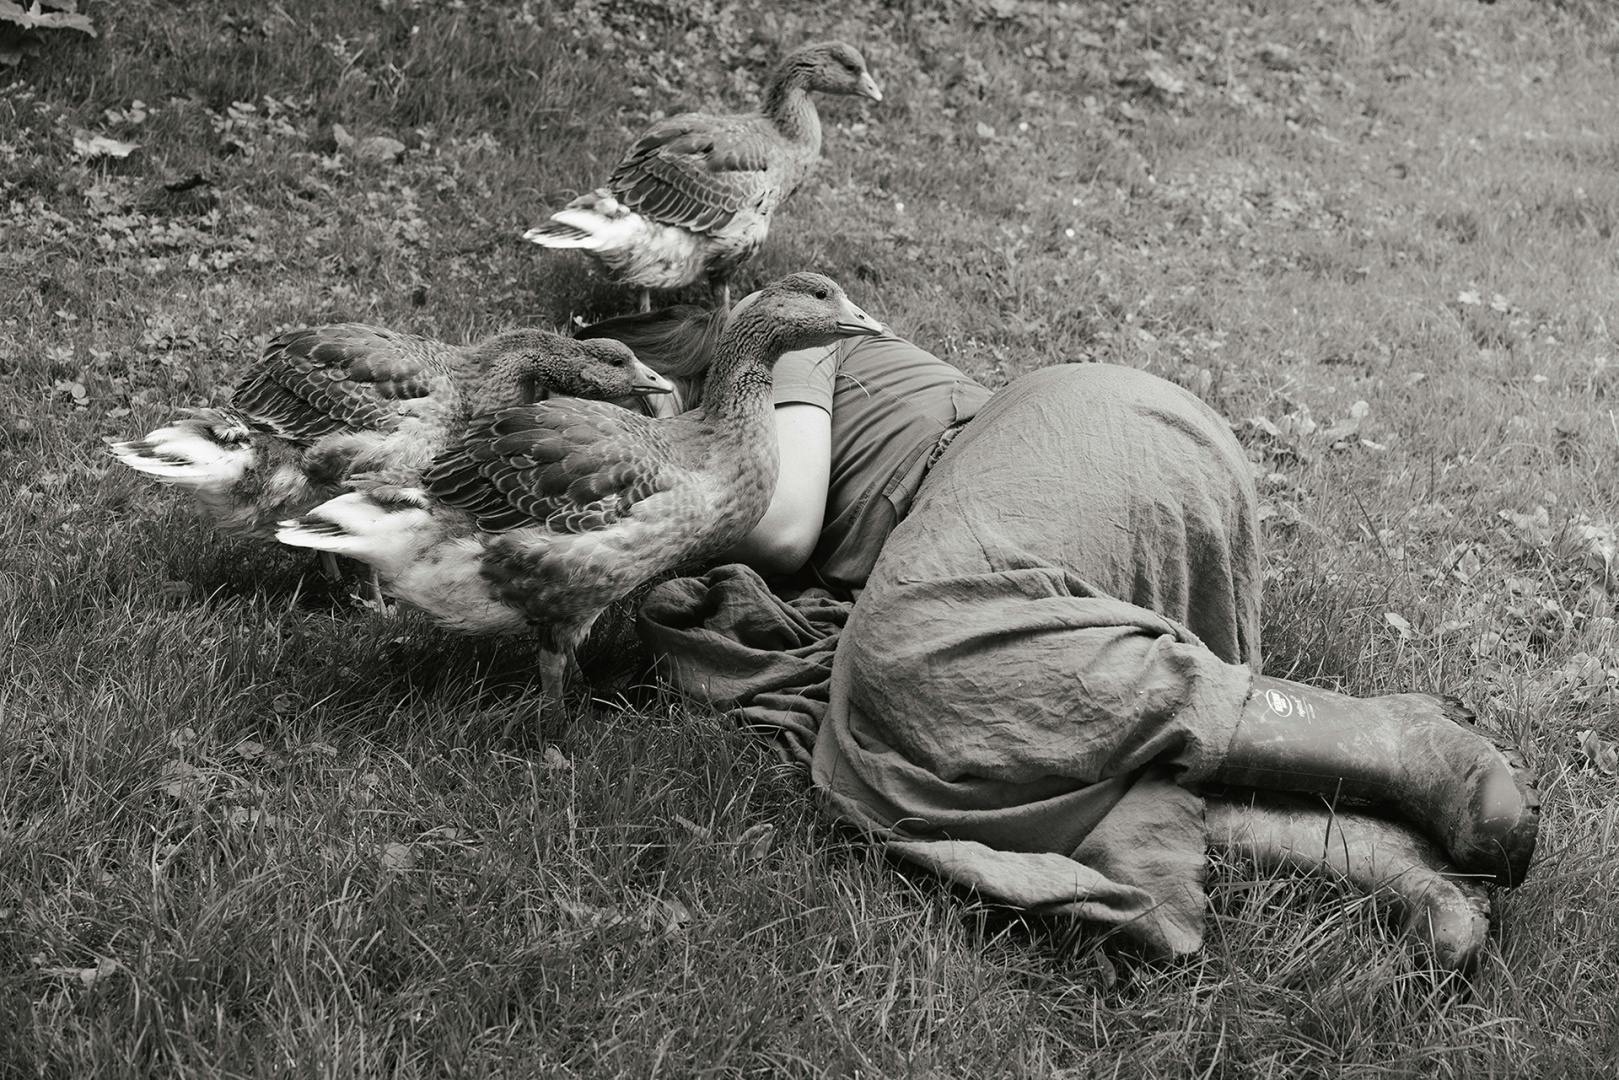 Black and white image shows a person in a dress lying on grass with her head concealed by geese, taken from Yana Wernicke's book Companions